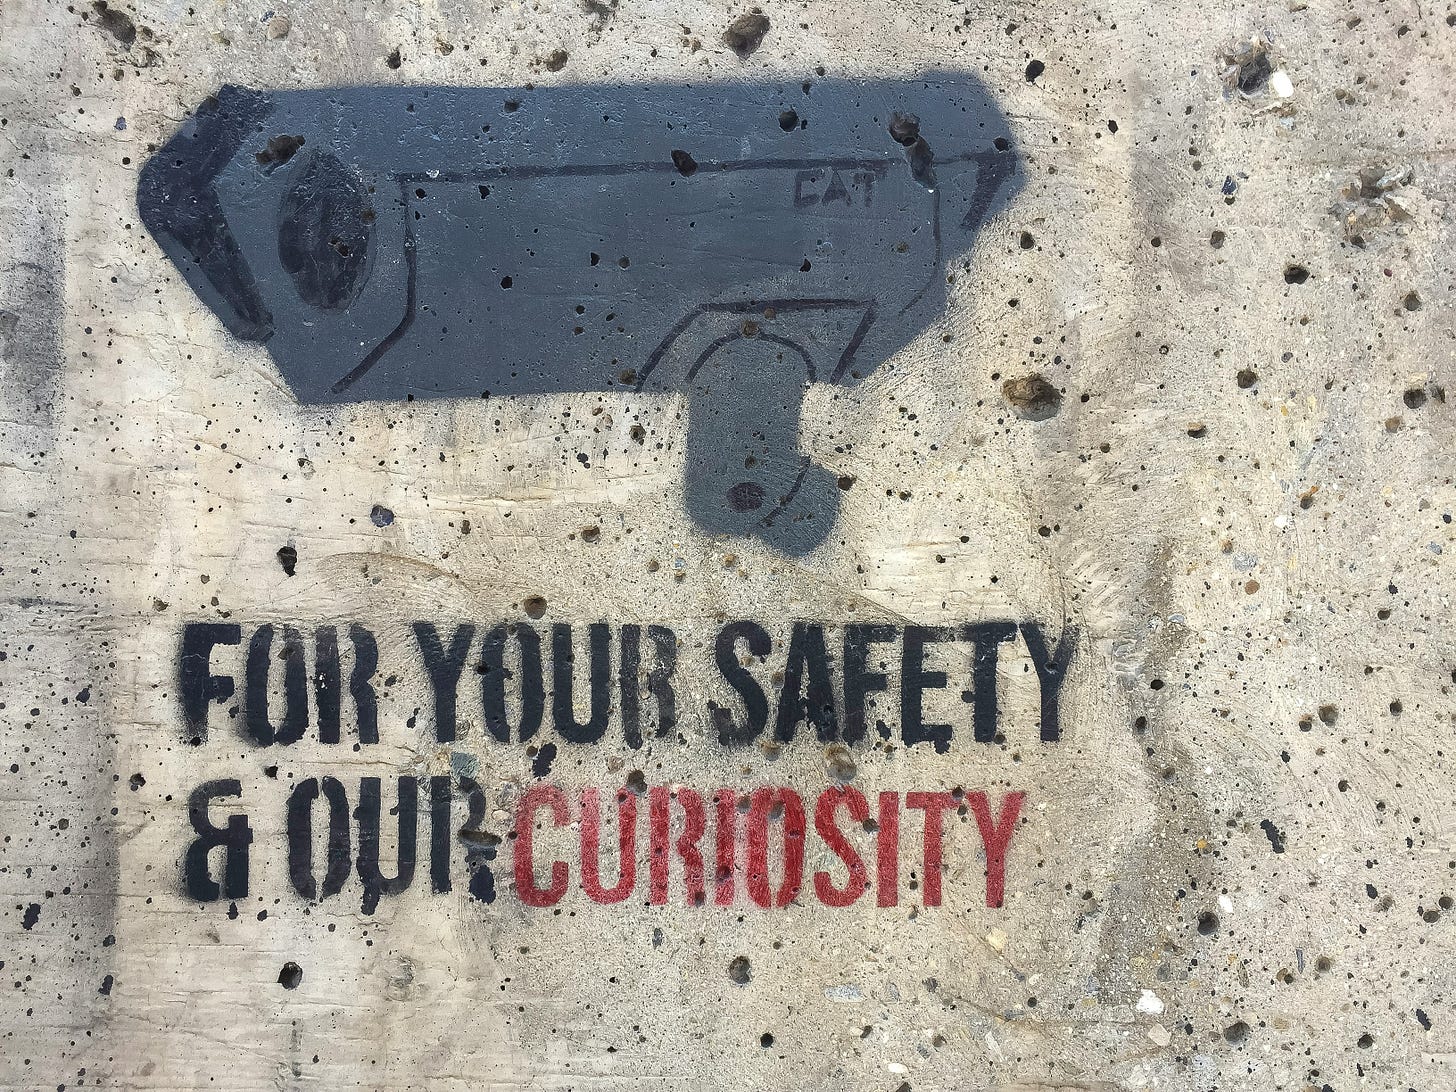 Spray paint surveillance camera and words stating "For Your Safety & Our Curiosity"